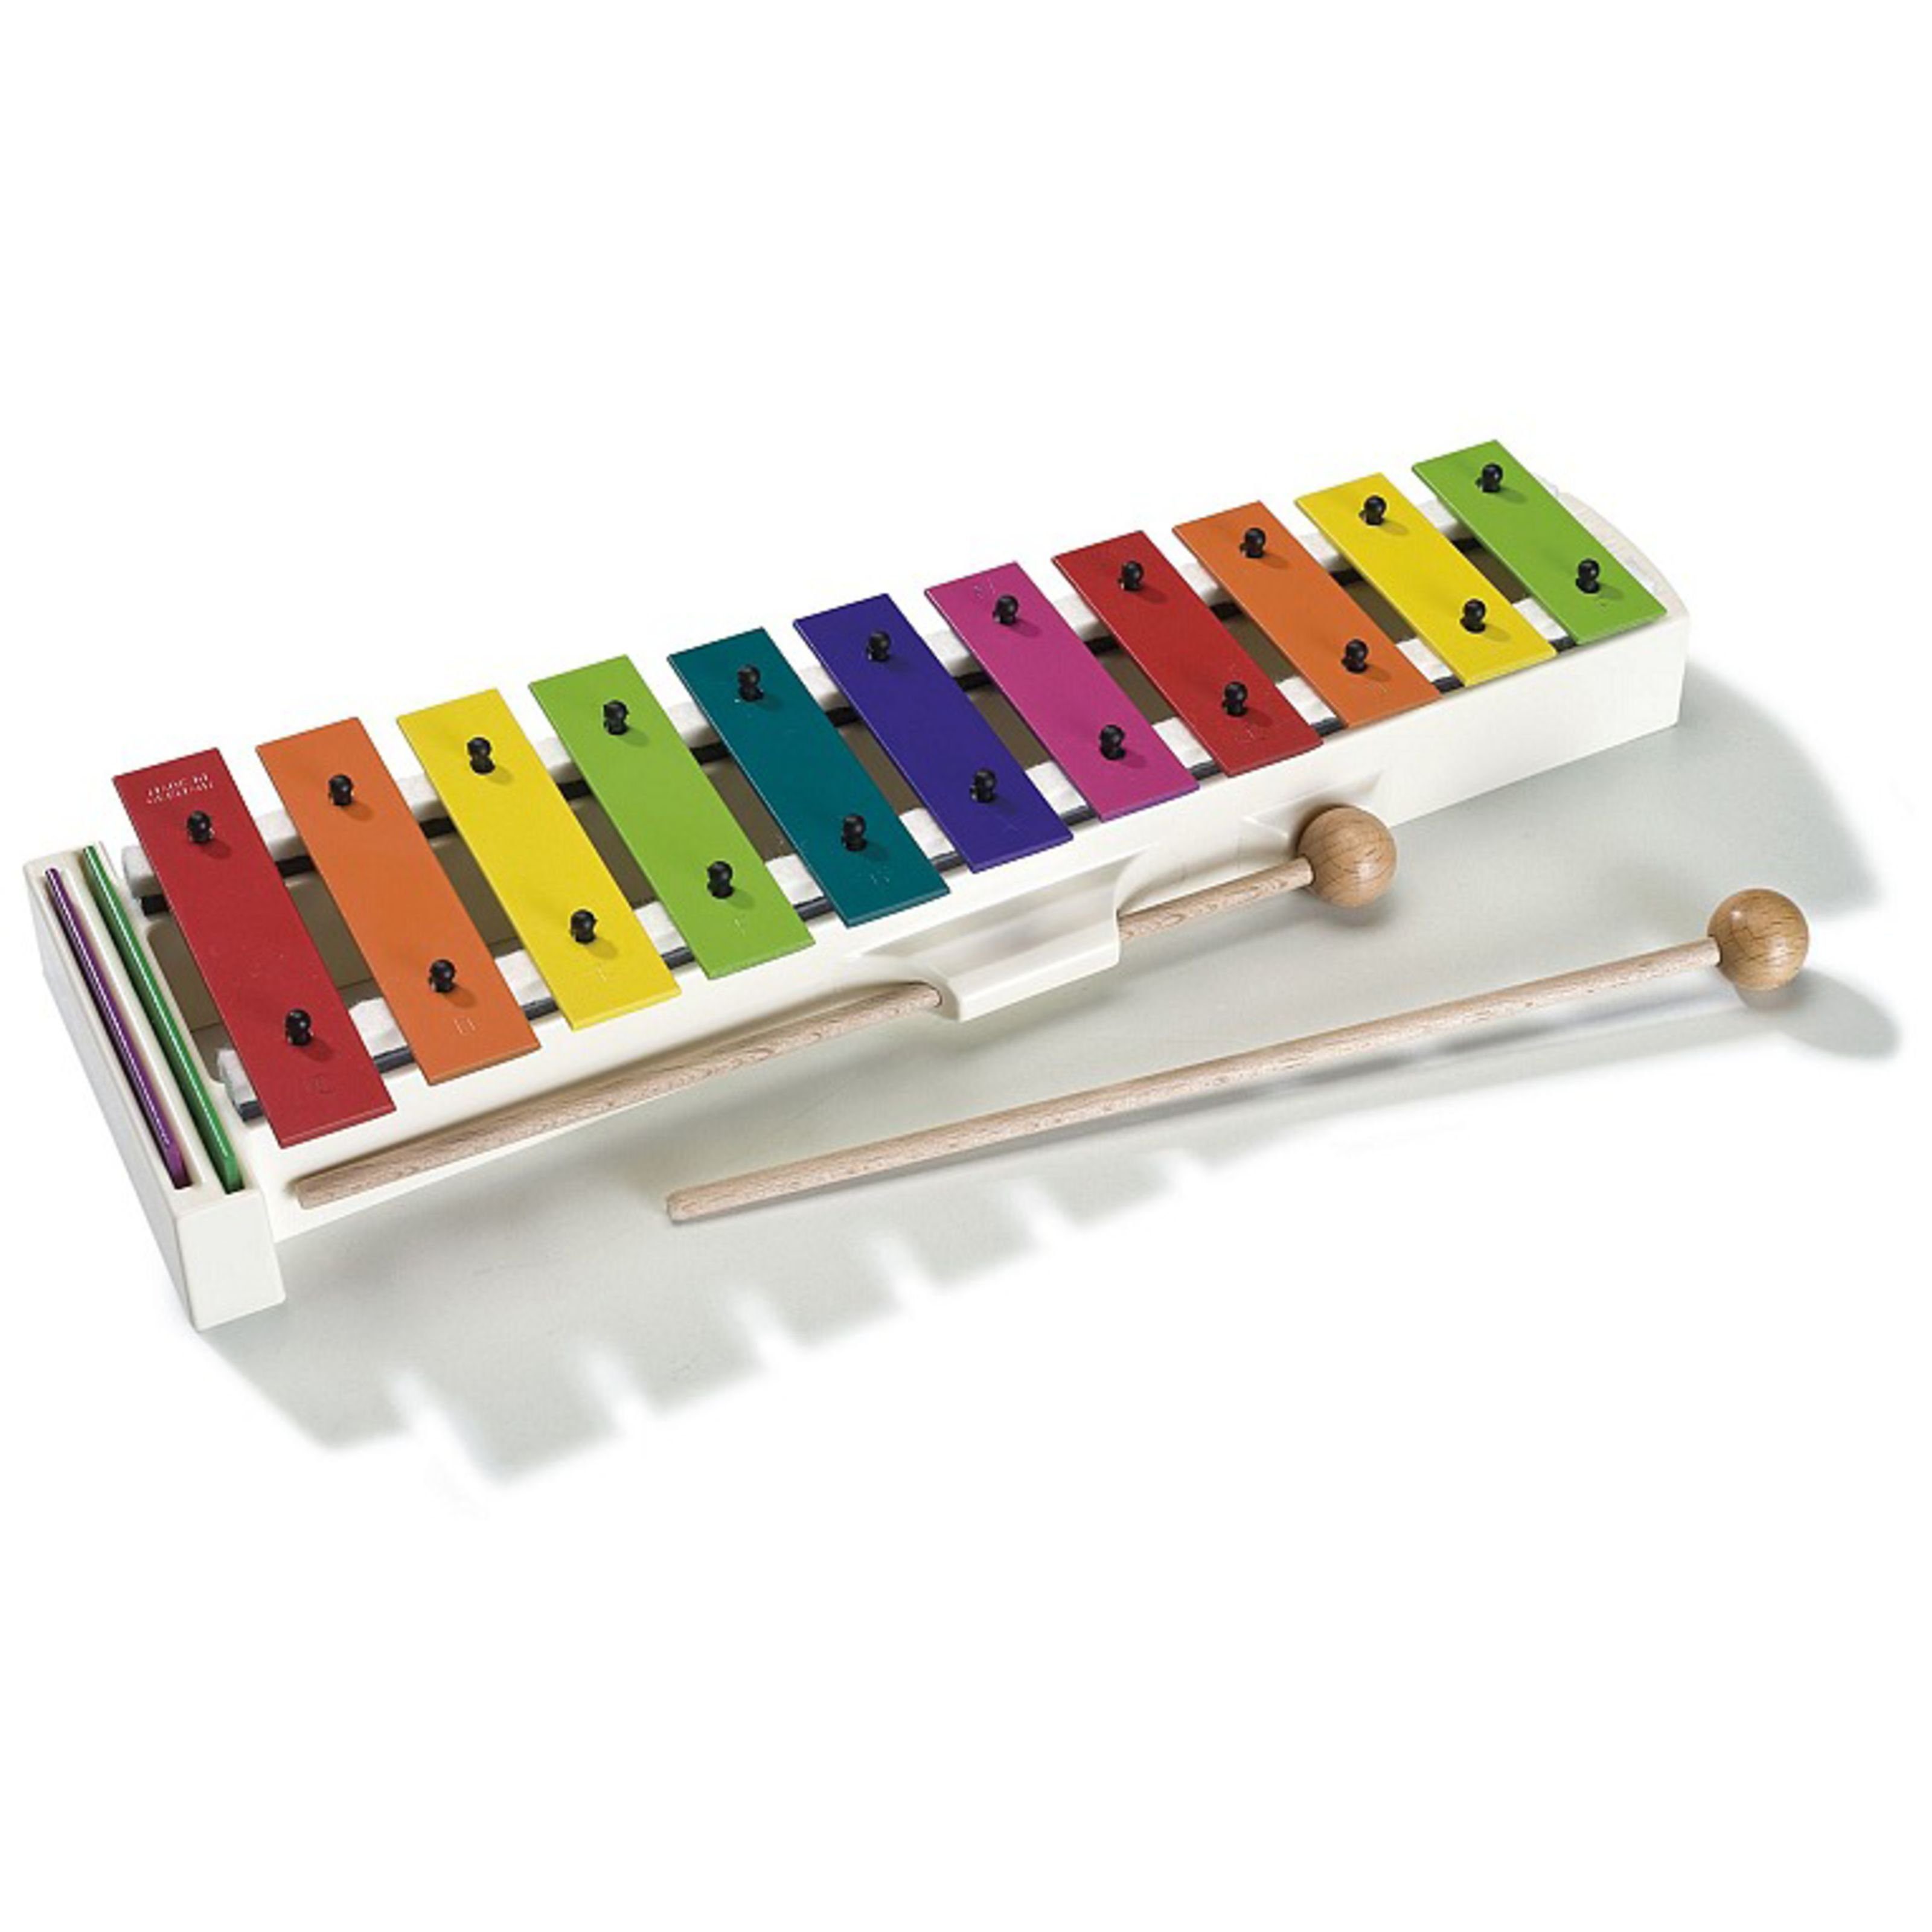 SONOR Boomwhacker,BWG Boomwhackers Glockenspiel, Percussion, Boomwhacker, BWG Boomwhackers Glockenspiel - Boomwhacker